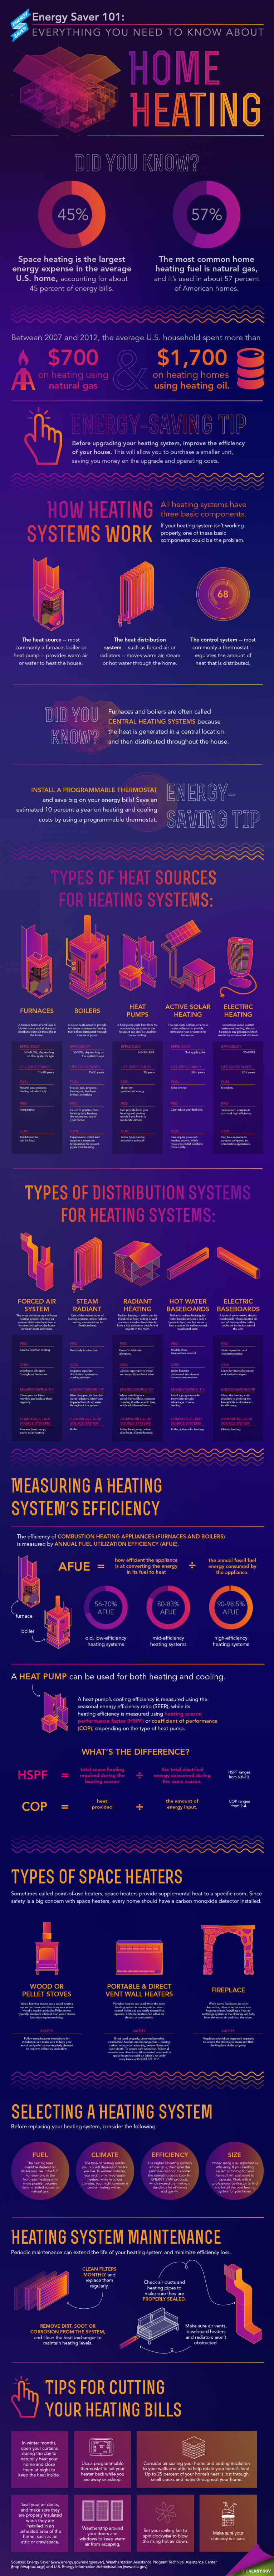 home_heating_infographic